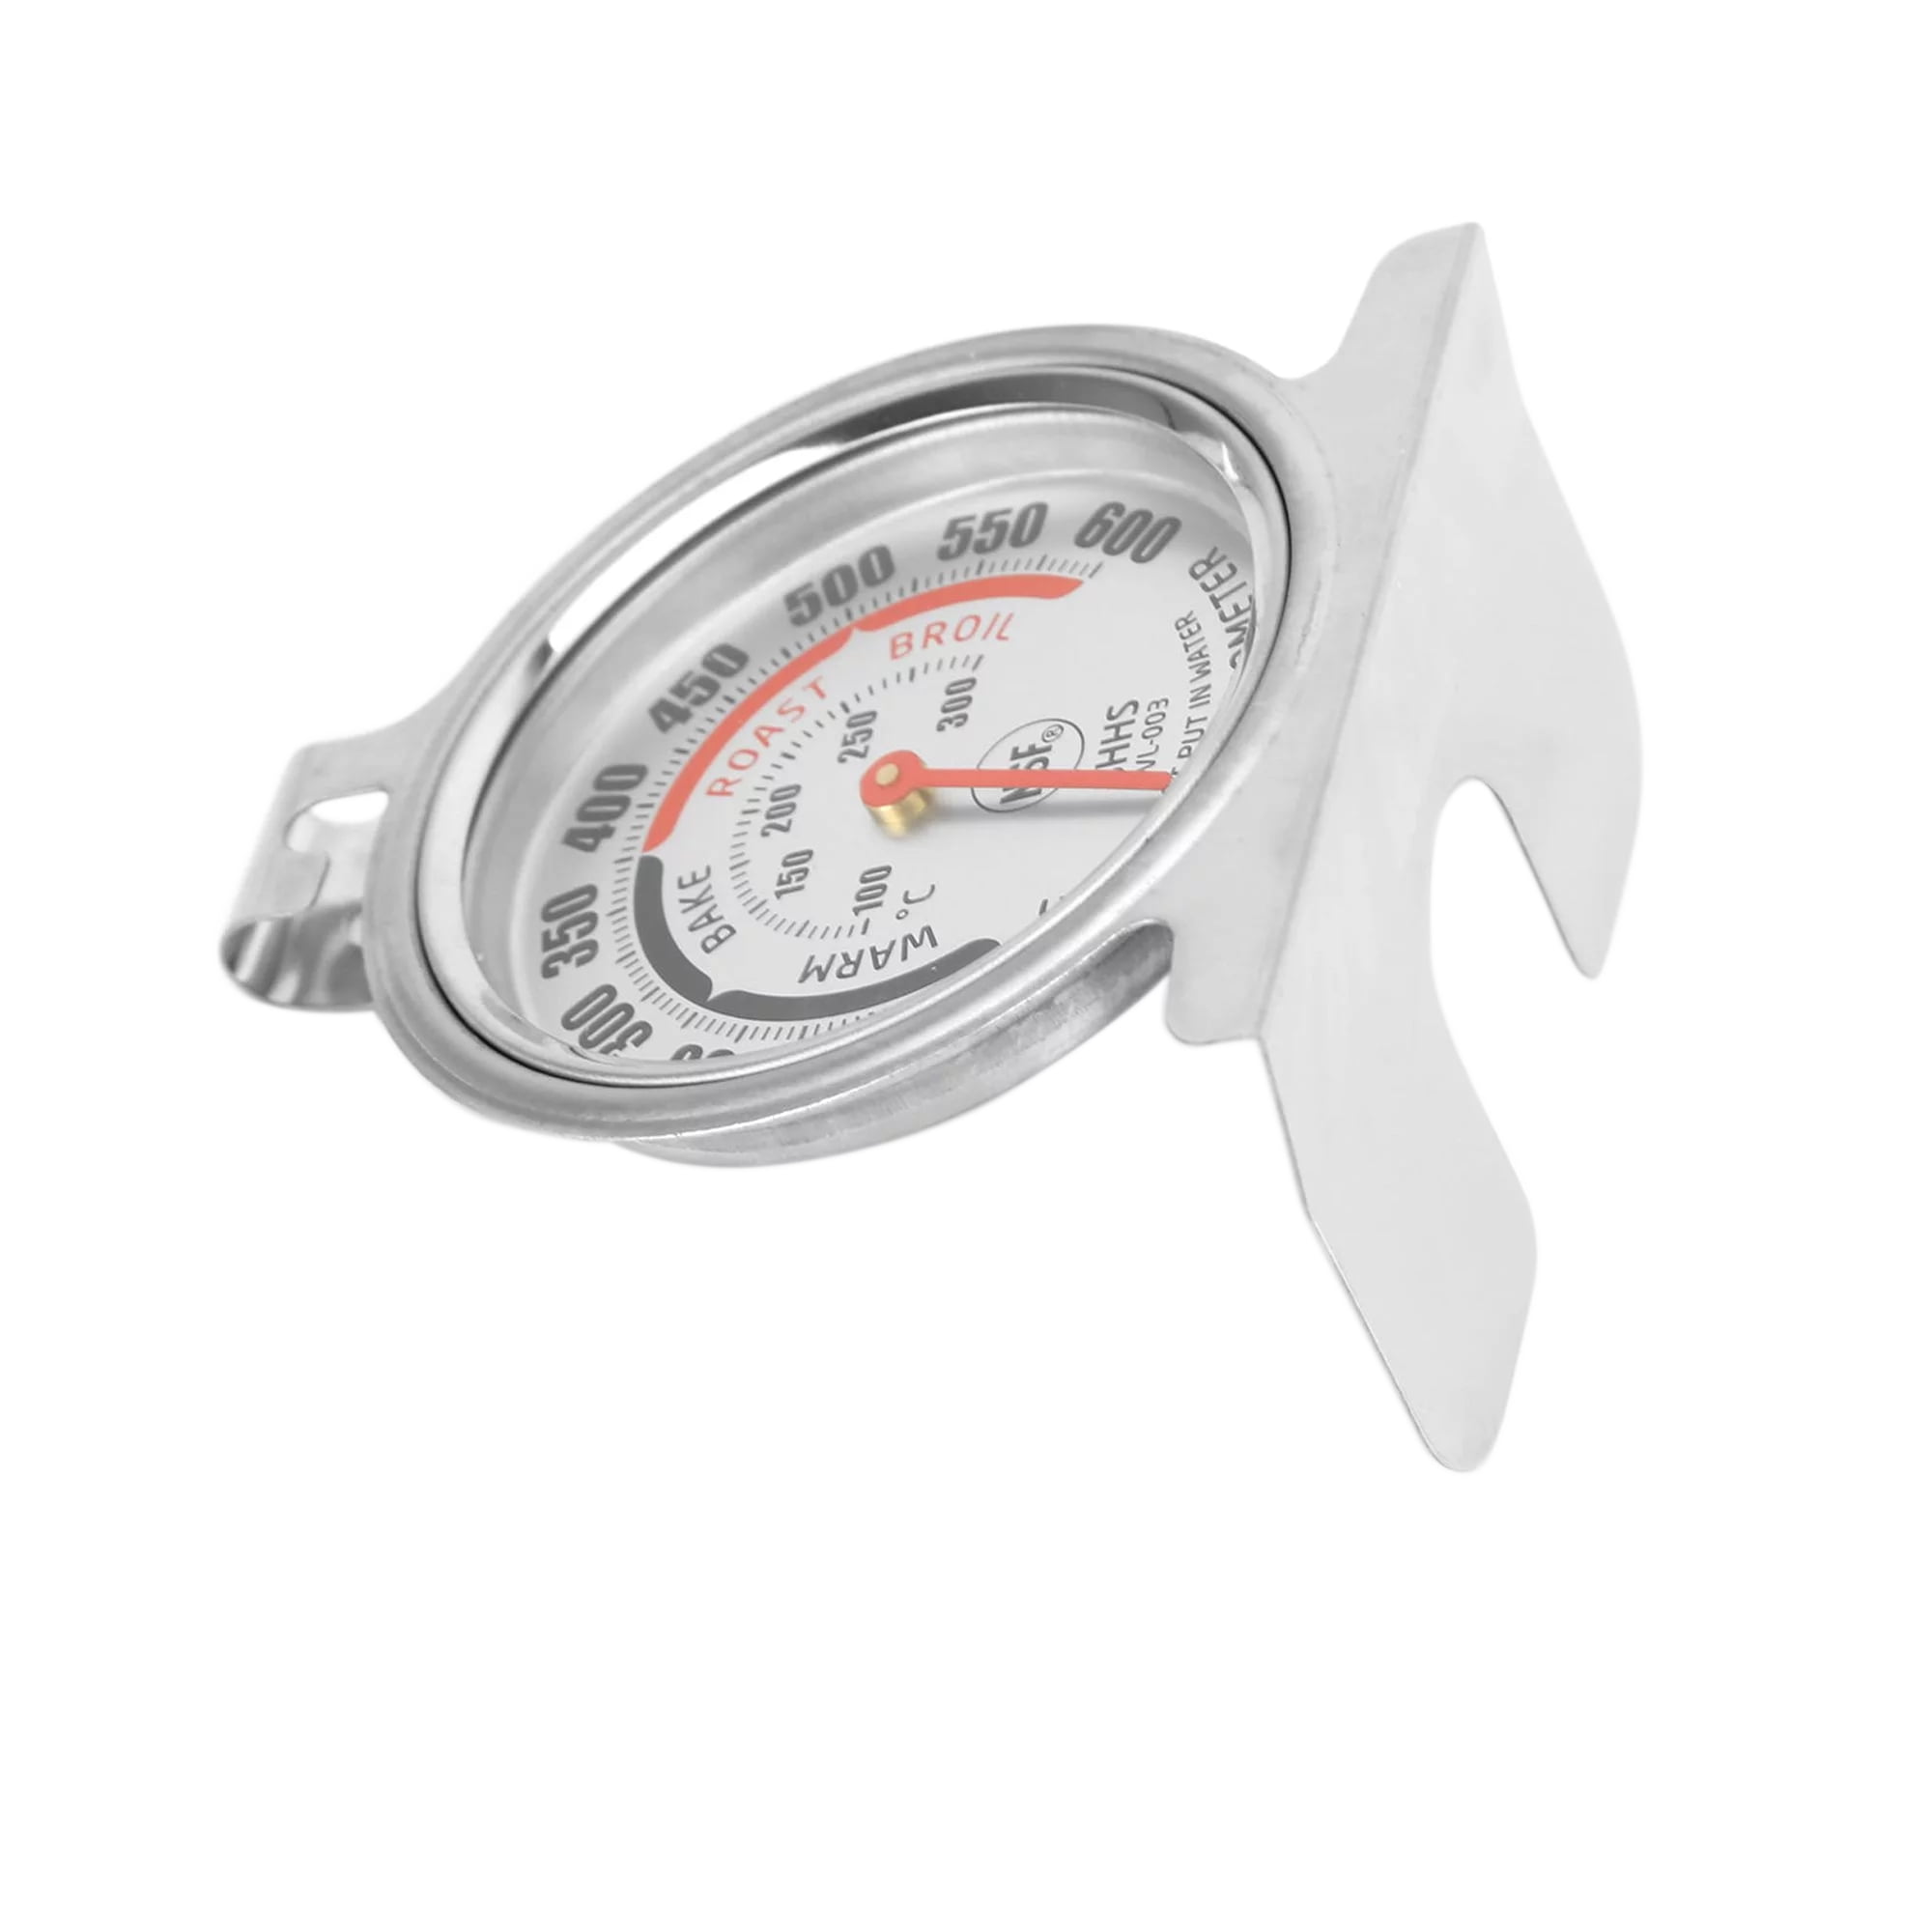 Mainstays Stainless Steel Meat Thermometer, Oven Thermometer with Dial  Thermometer